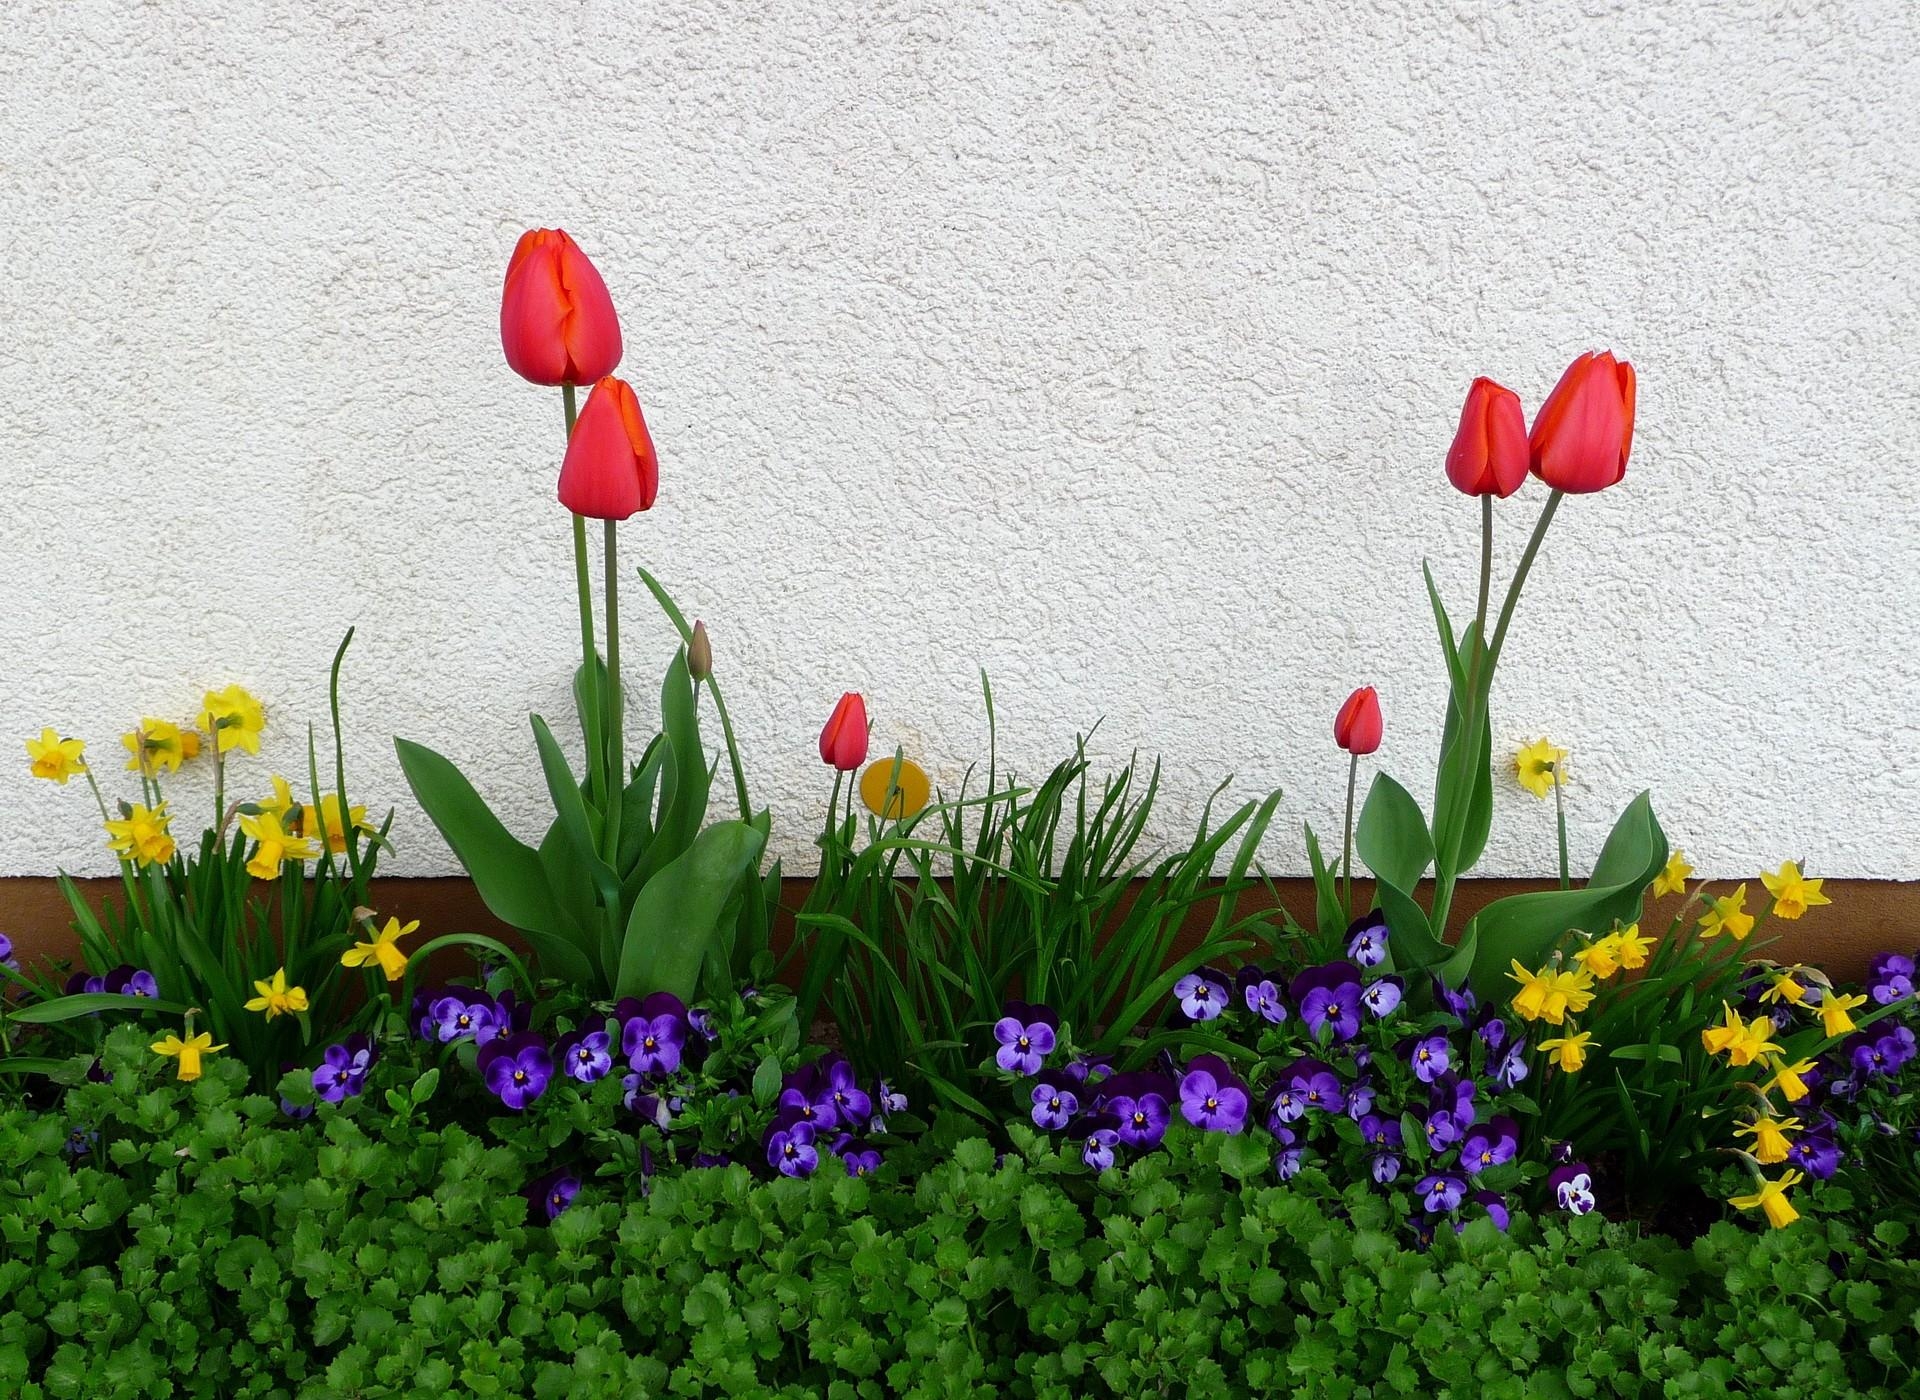 1920x1080 Background tulips, flowers, pansies, narcissussi, greens, flower bed, flowerbed, wall, spring